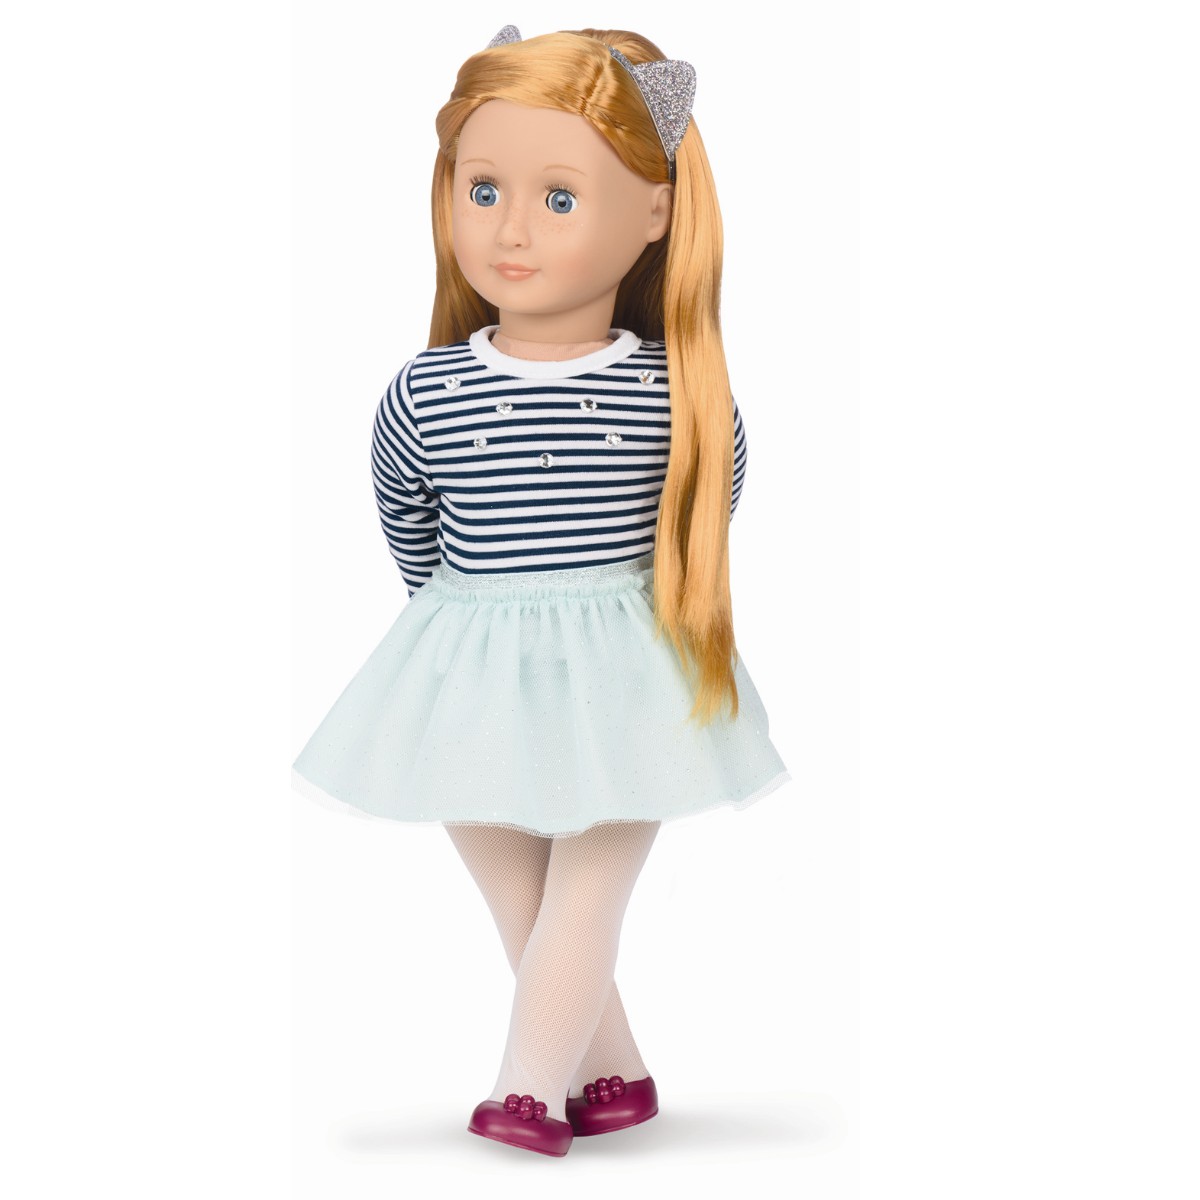 Our Generation - Arlee Doll (731104)